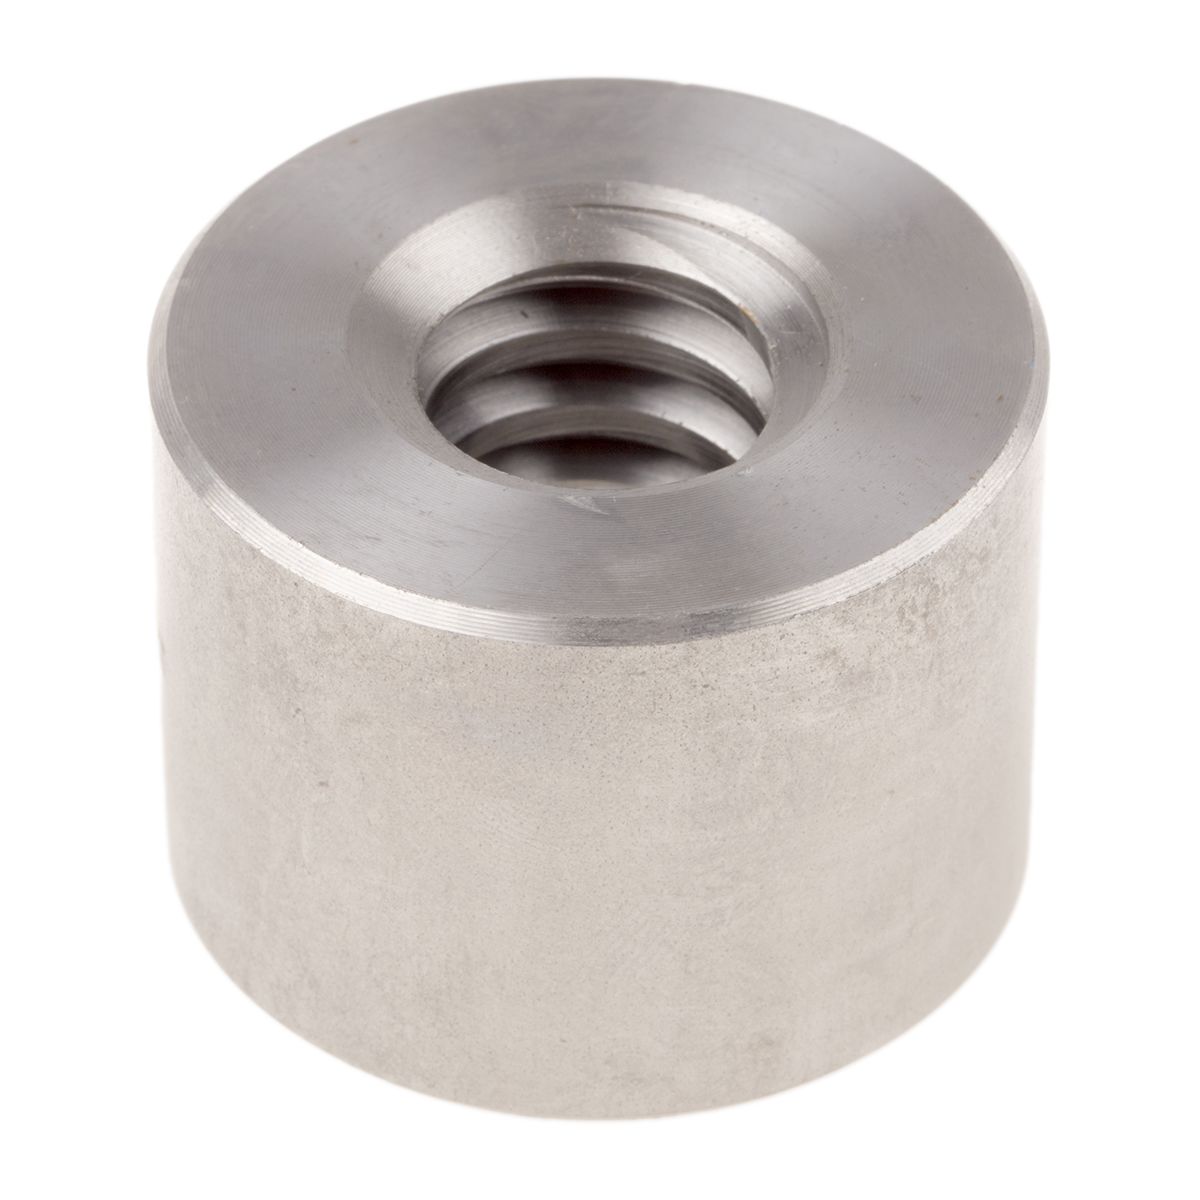 RS PRO Cylindrical Nut For Lead Screw, Dia. 22mm